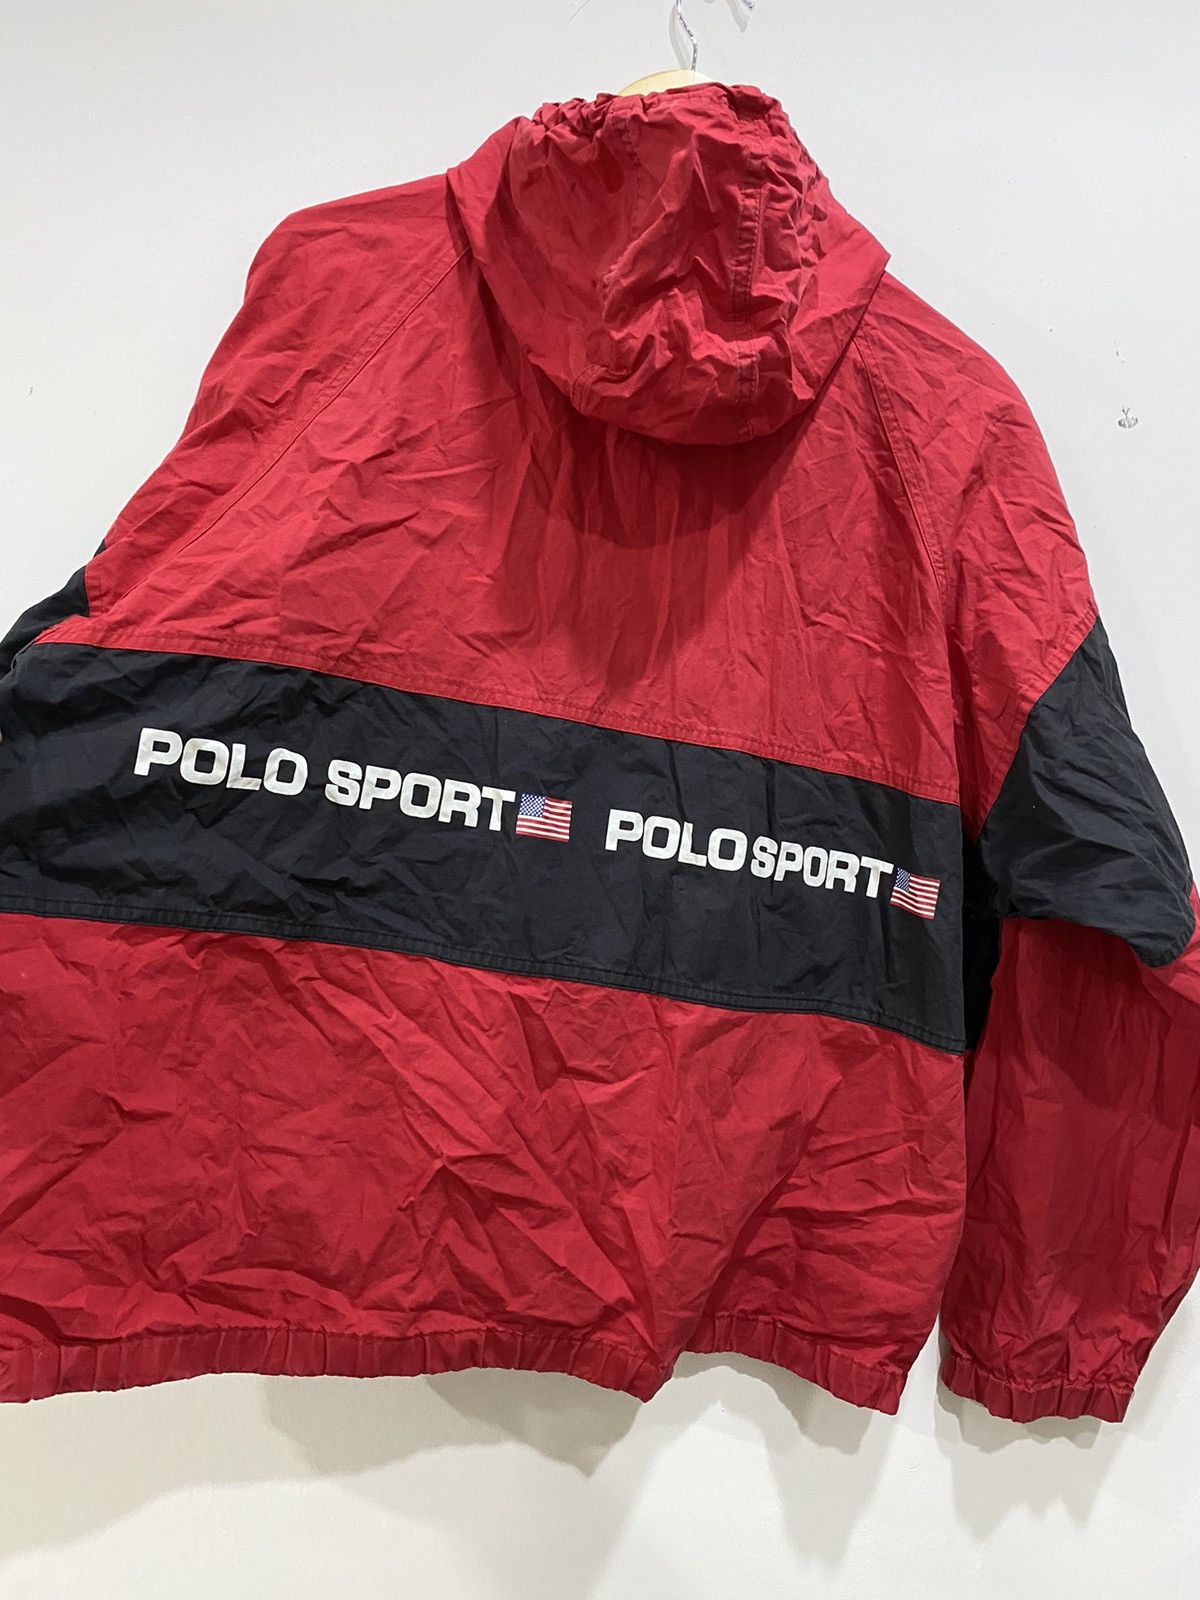 Vintage Polo Sport Ralph Lauren Spell Out Jacket - 18